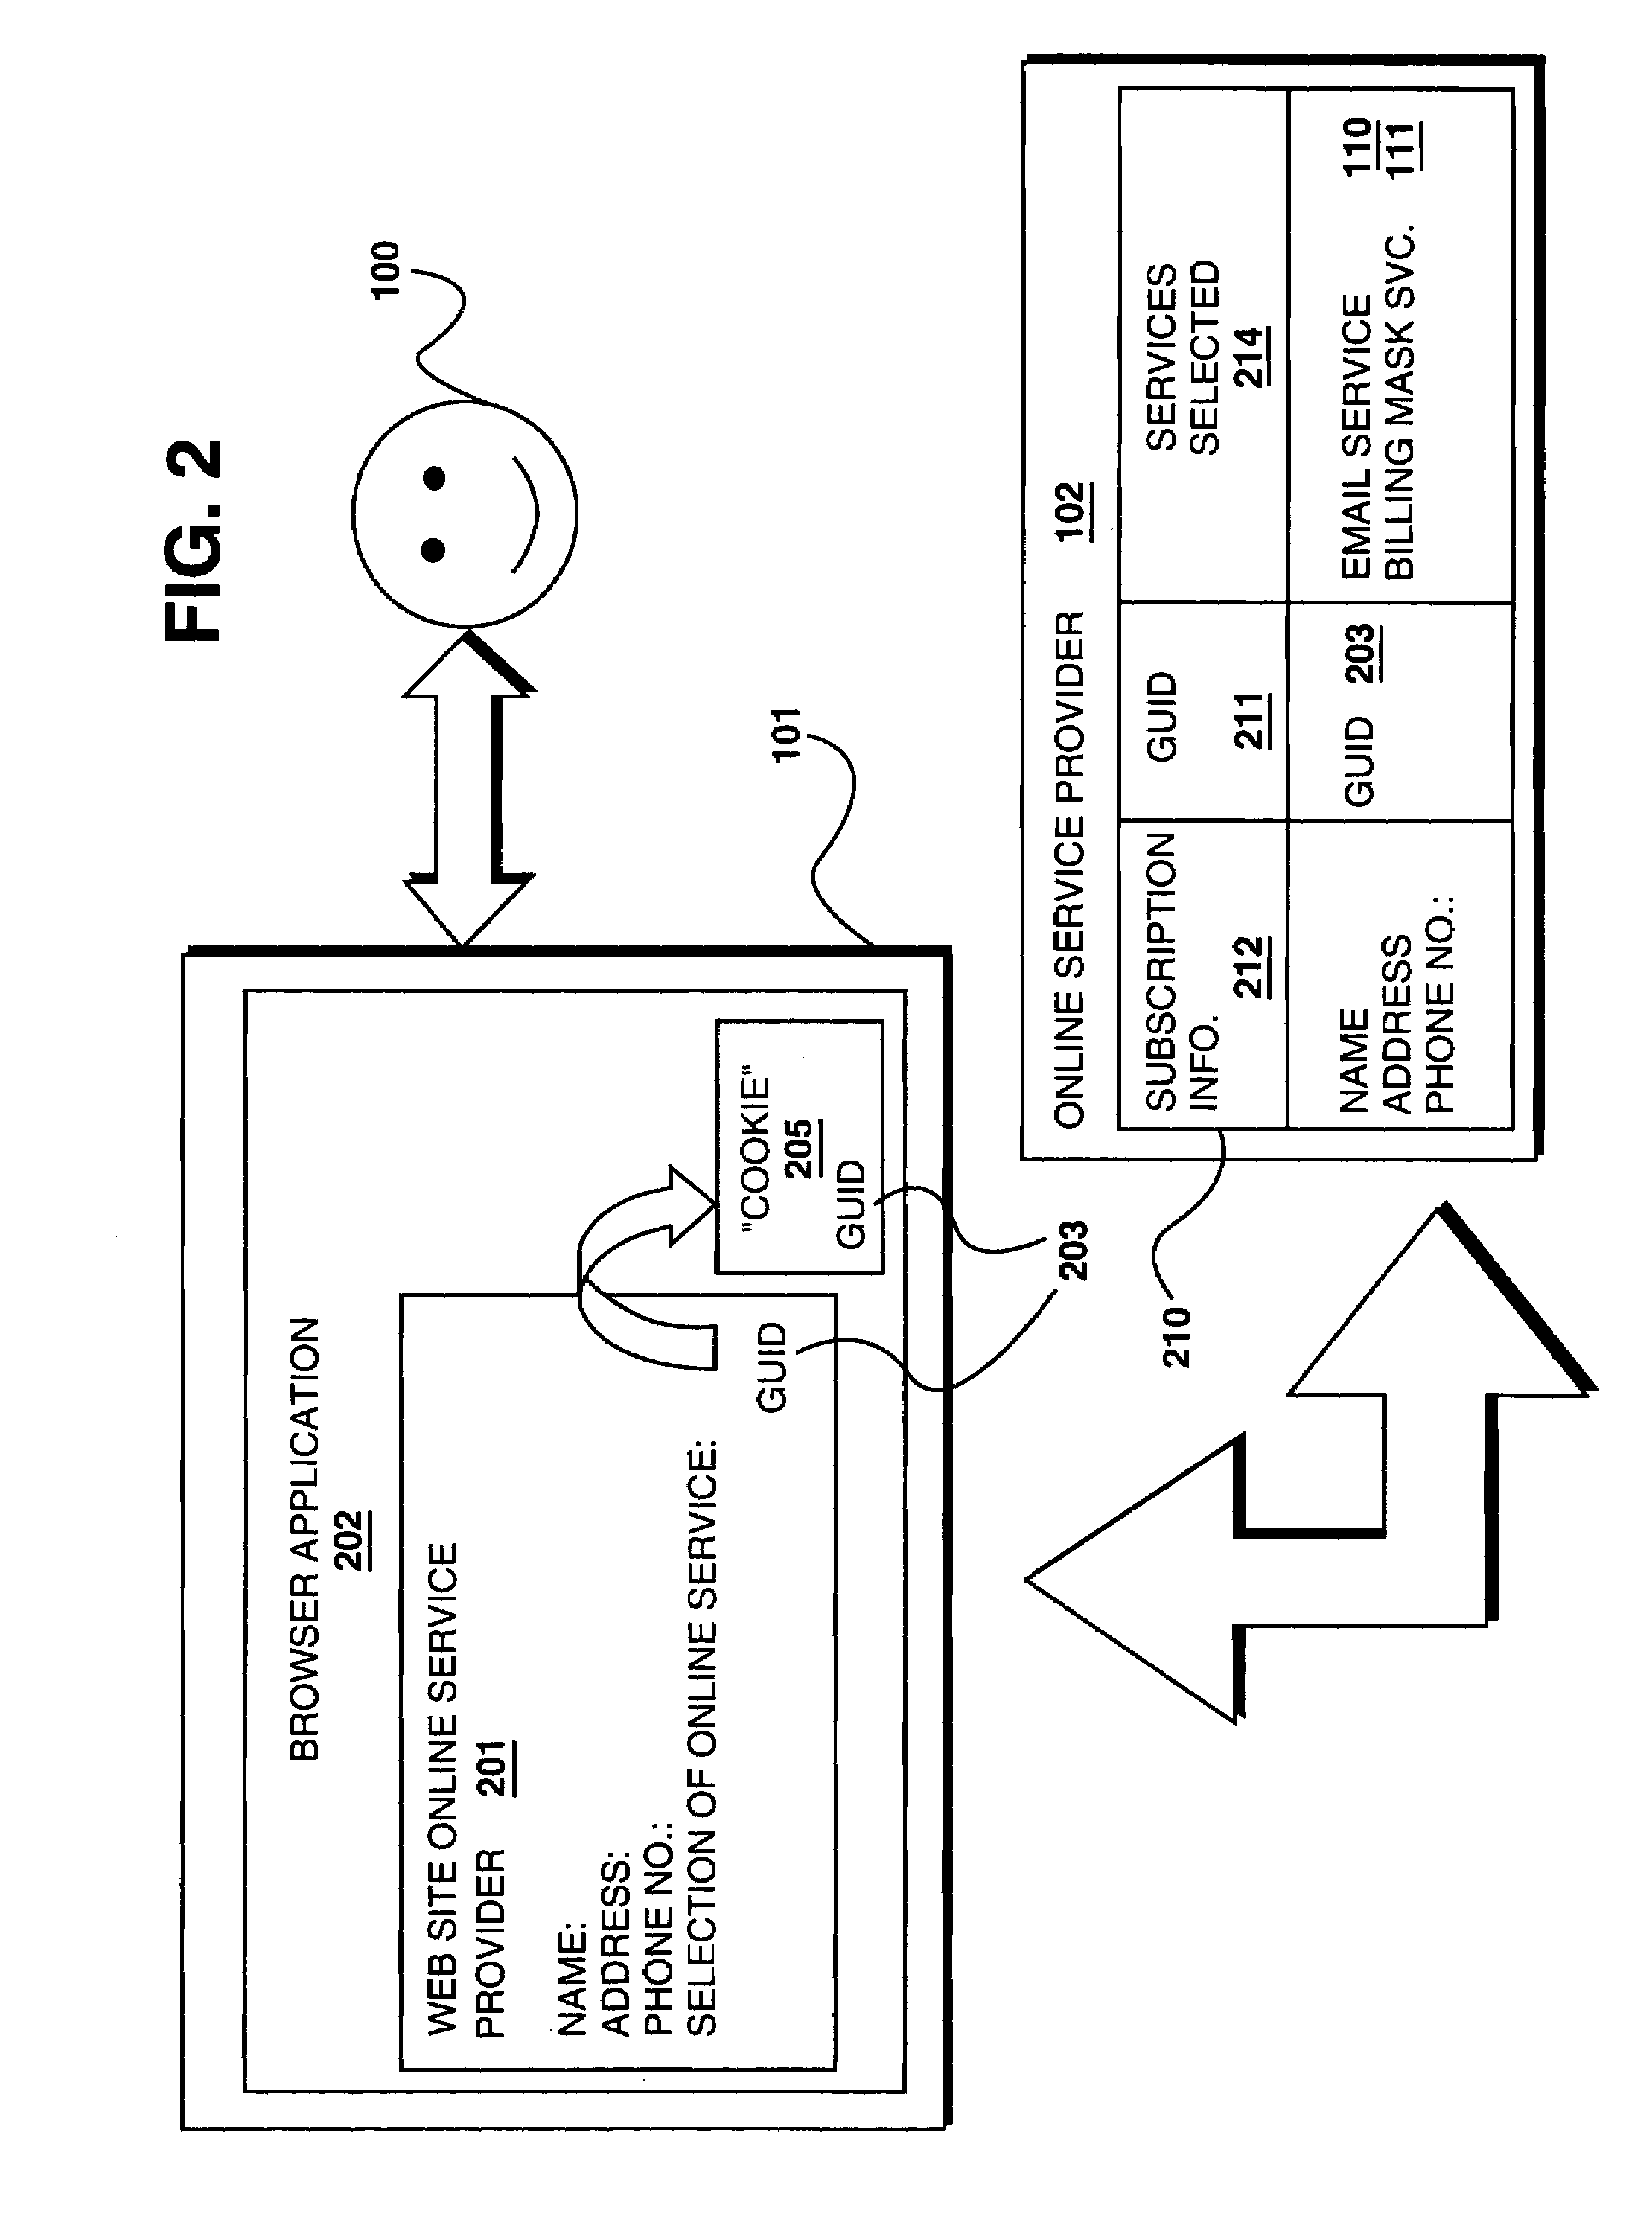 Method and apparatus for simplified access to online services